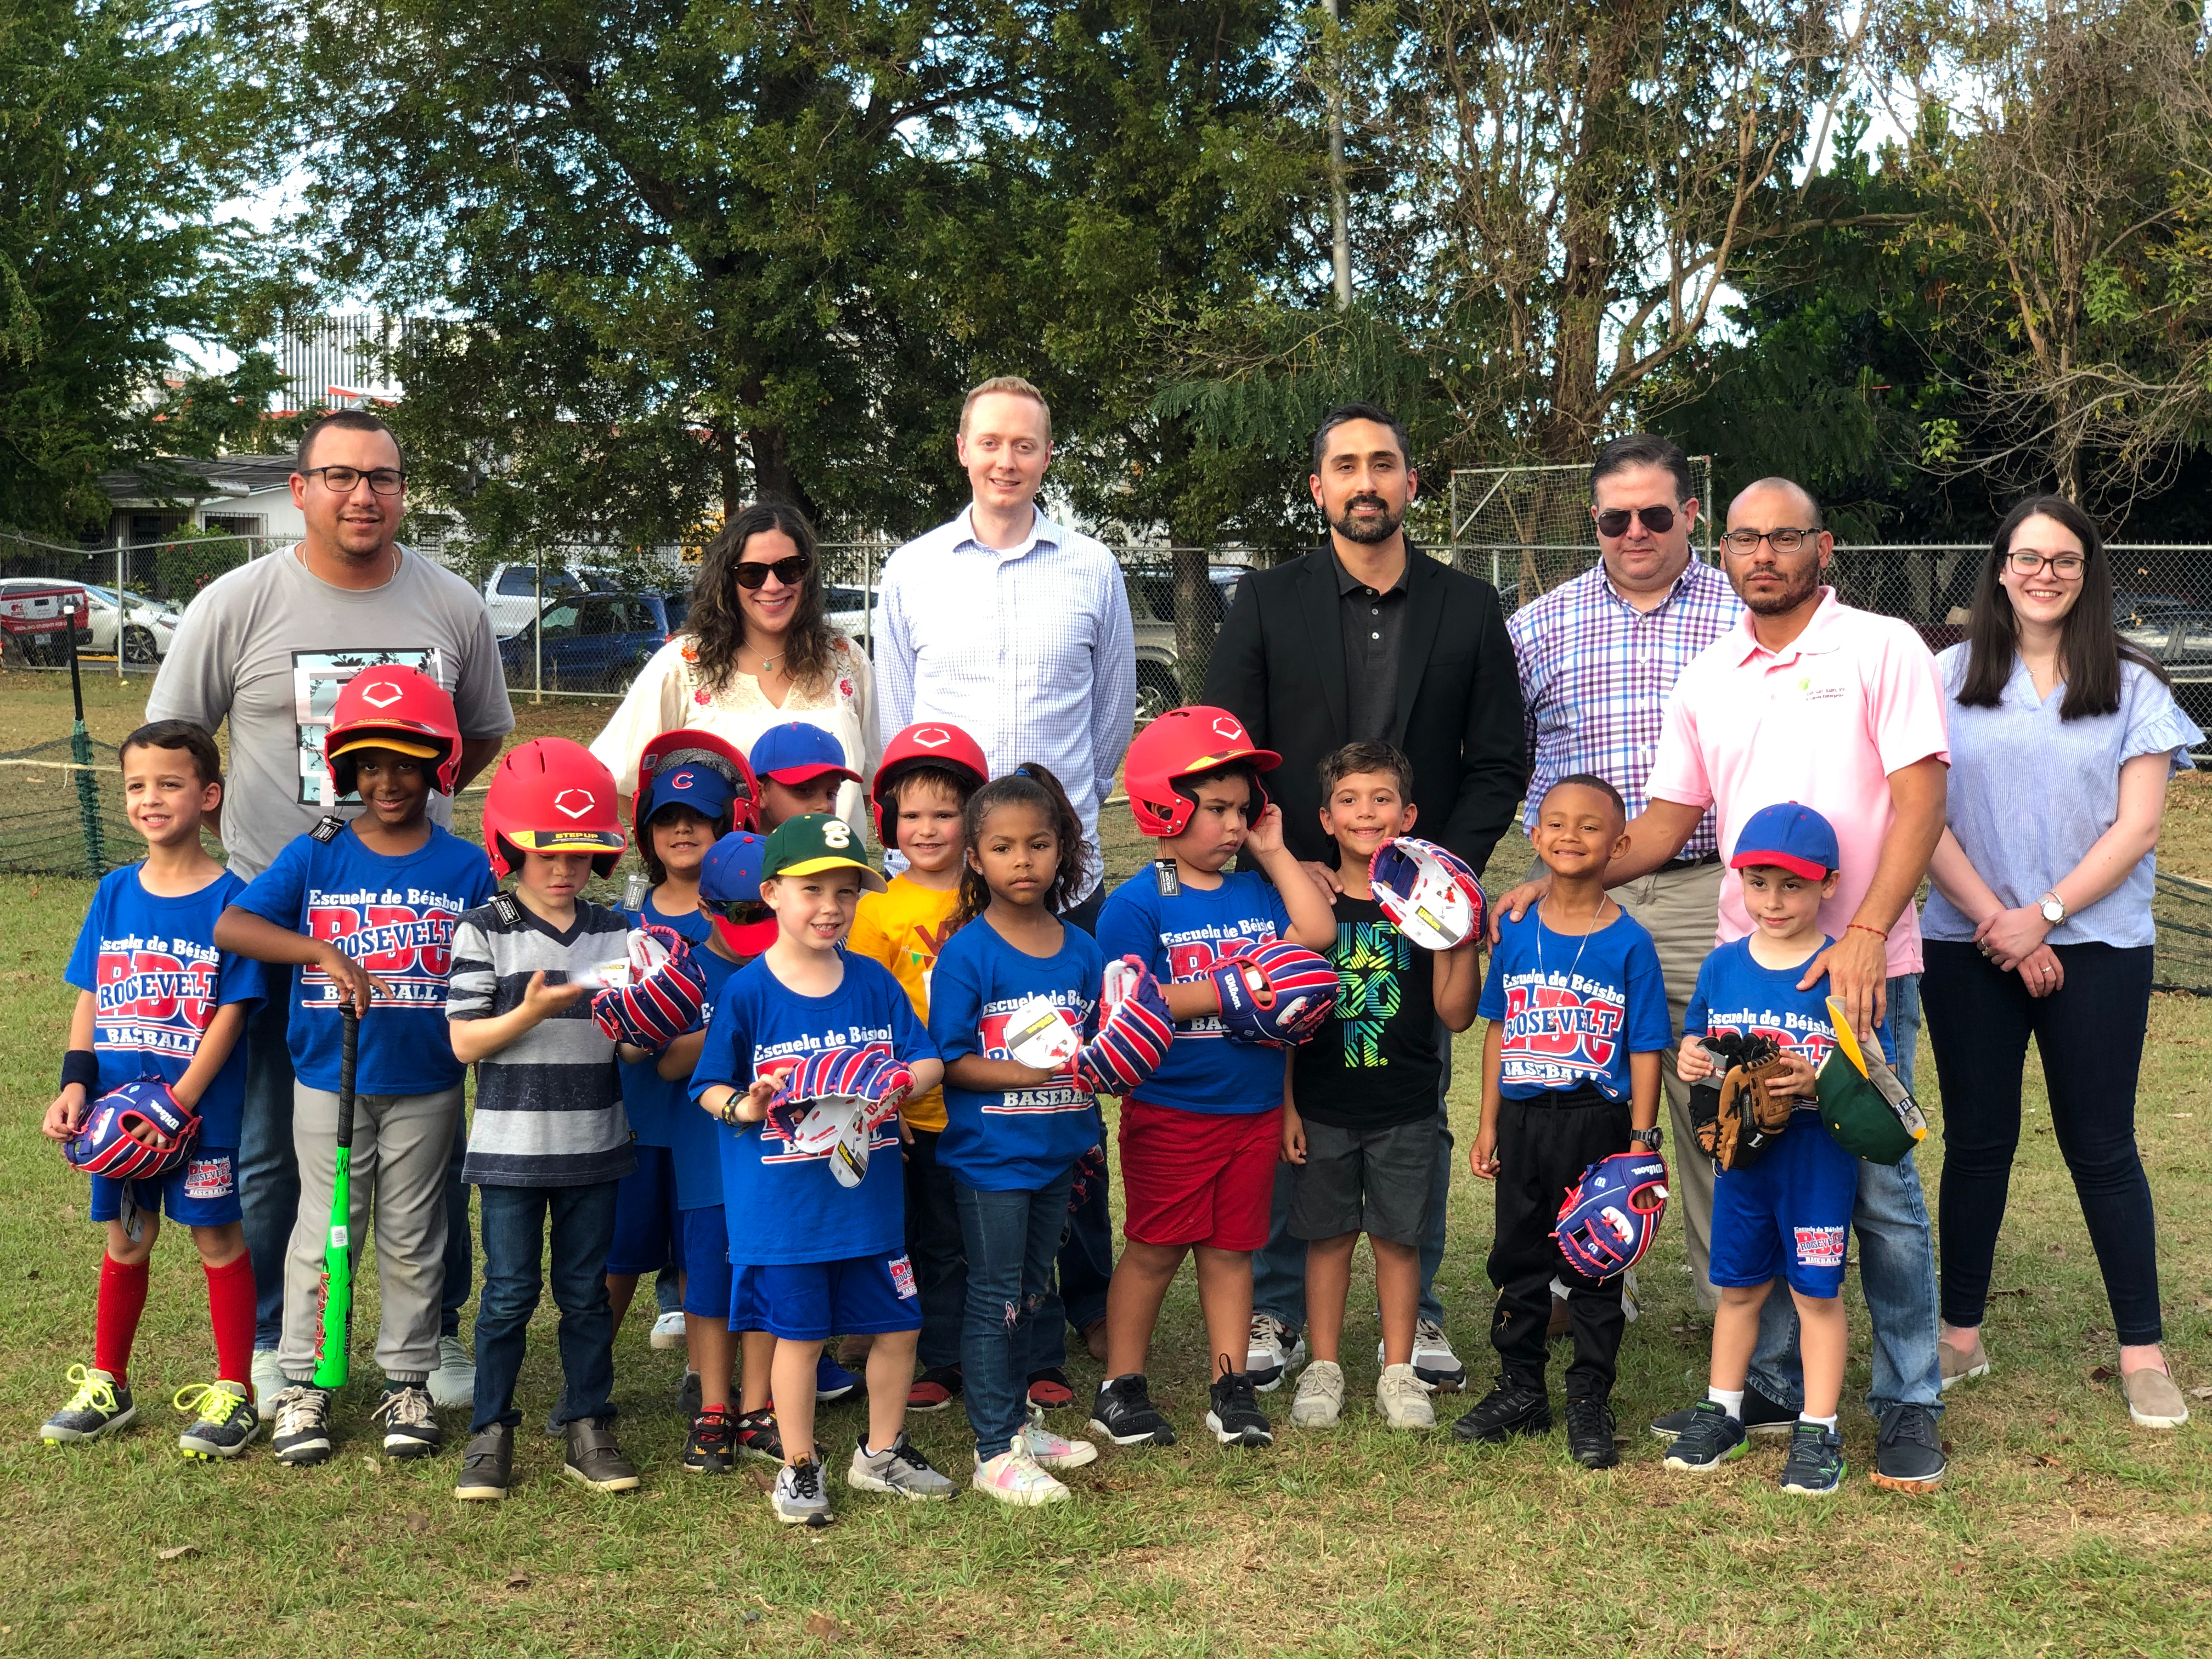 PIFBS donates equipment to four leagues in Puerto Rico